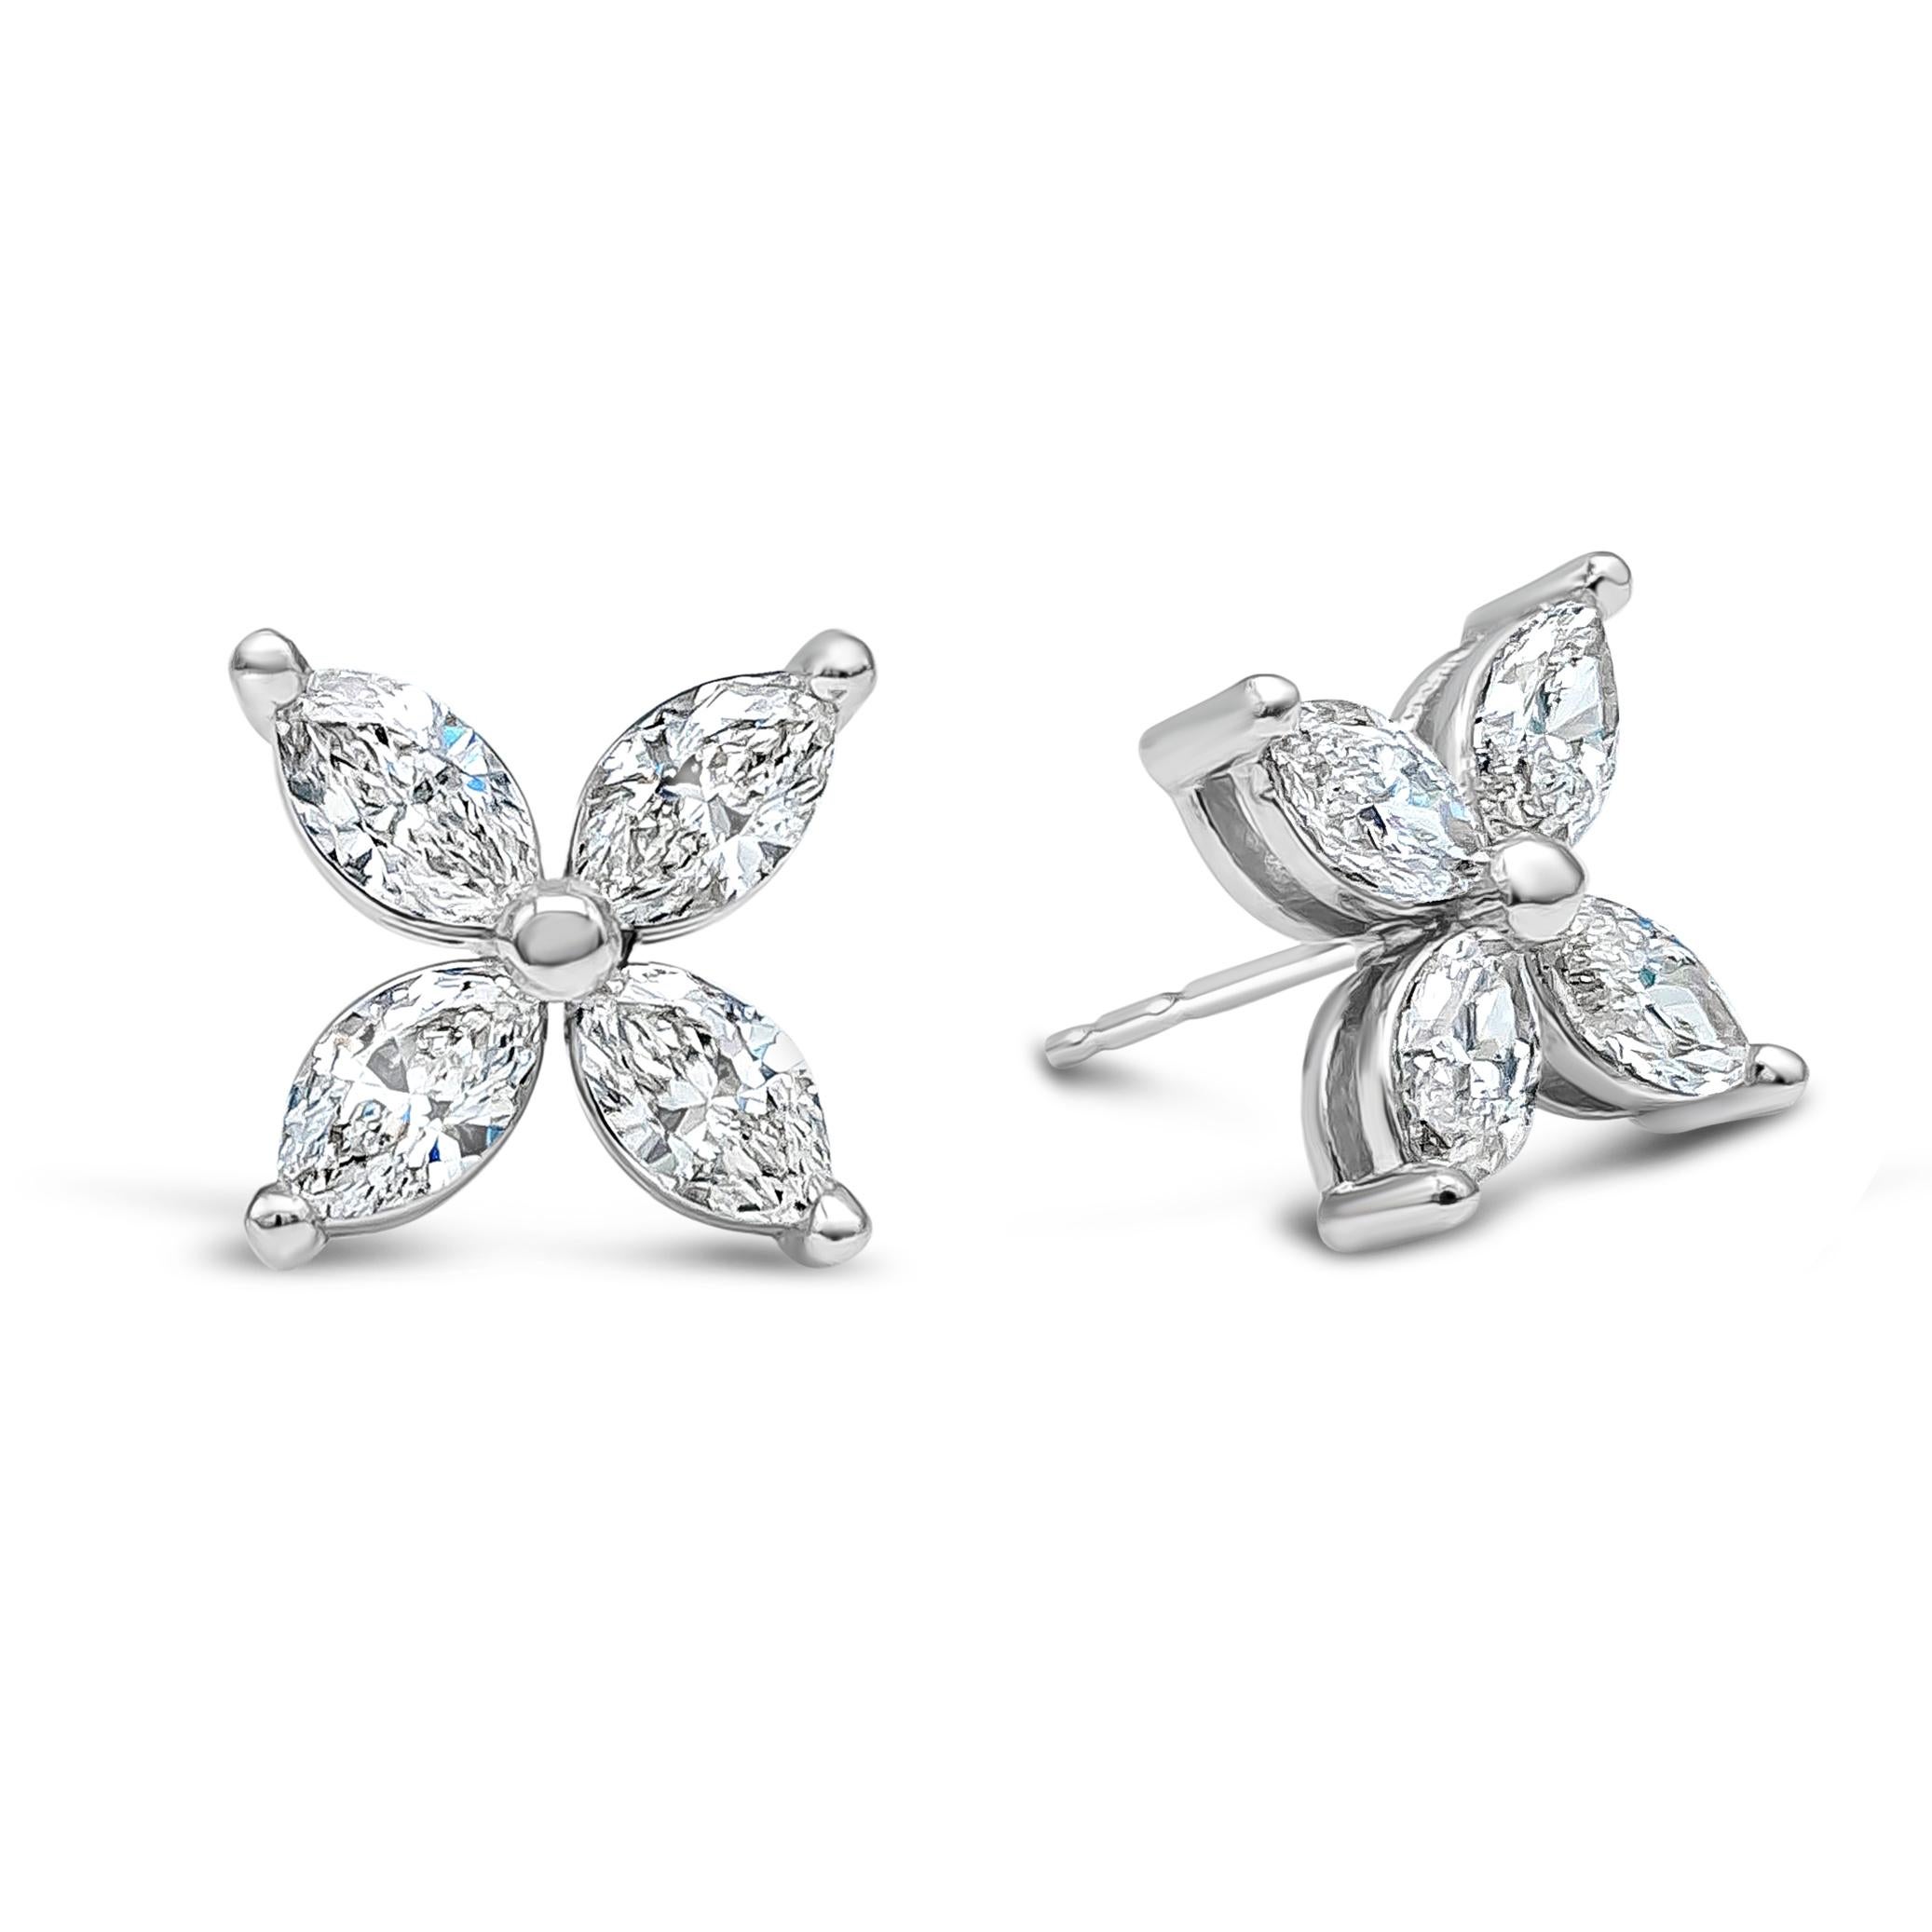 A simple and unique studs earrings feature 1.98 carat total, made with 8 pieces of marquise cut diamonds, E-F Color, VS-SI1 in Clarity. Beautifully set in a clover leaf-like aspect and made with 18K White Gold.

Style available in different price